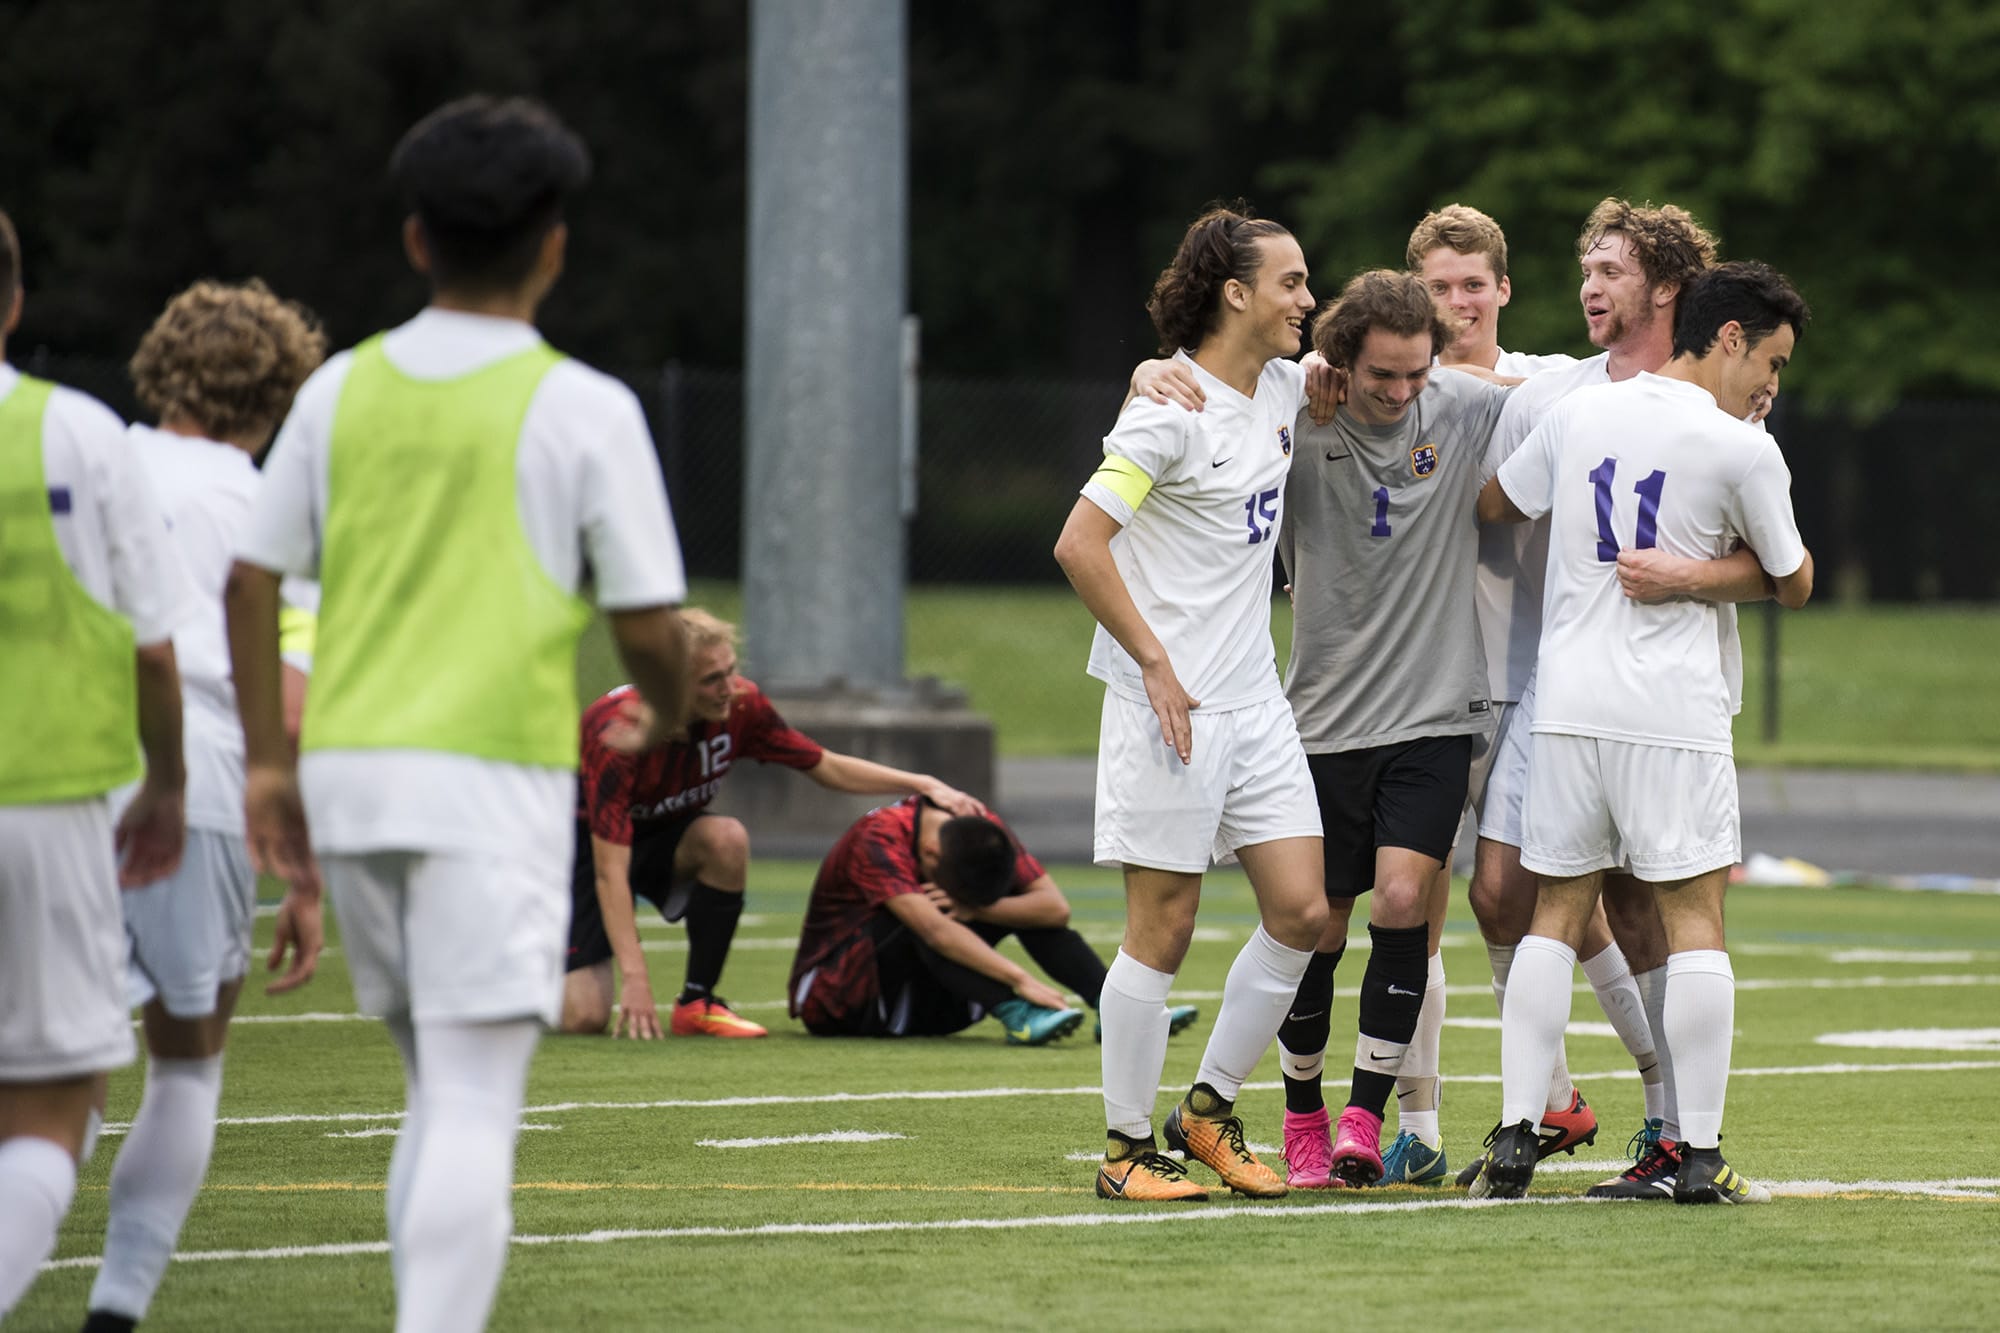 Columbia River celebrates their win against Clarkston after the first round of the Class 2A state playoffs at Kiggins Bowl in Vancouver on Wednesday, May 16, 2018. Columbia River won 3-2.